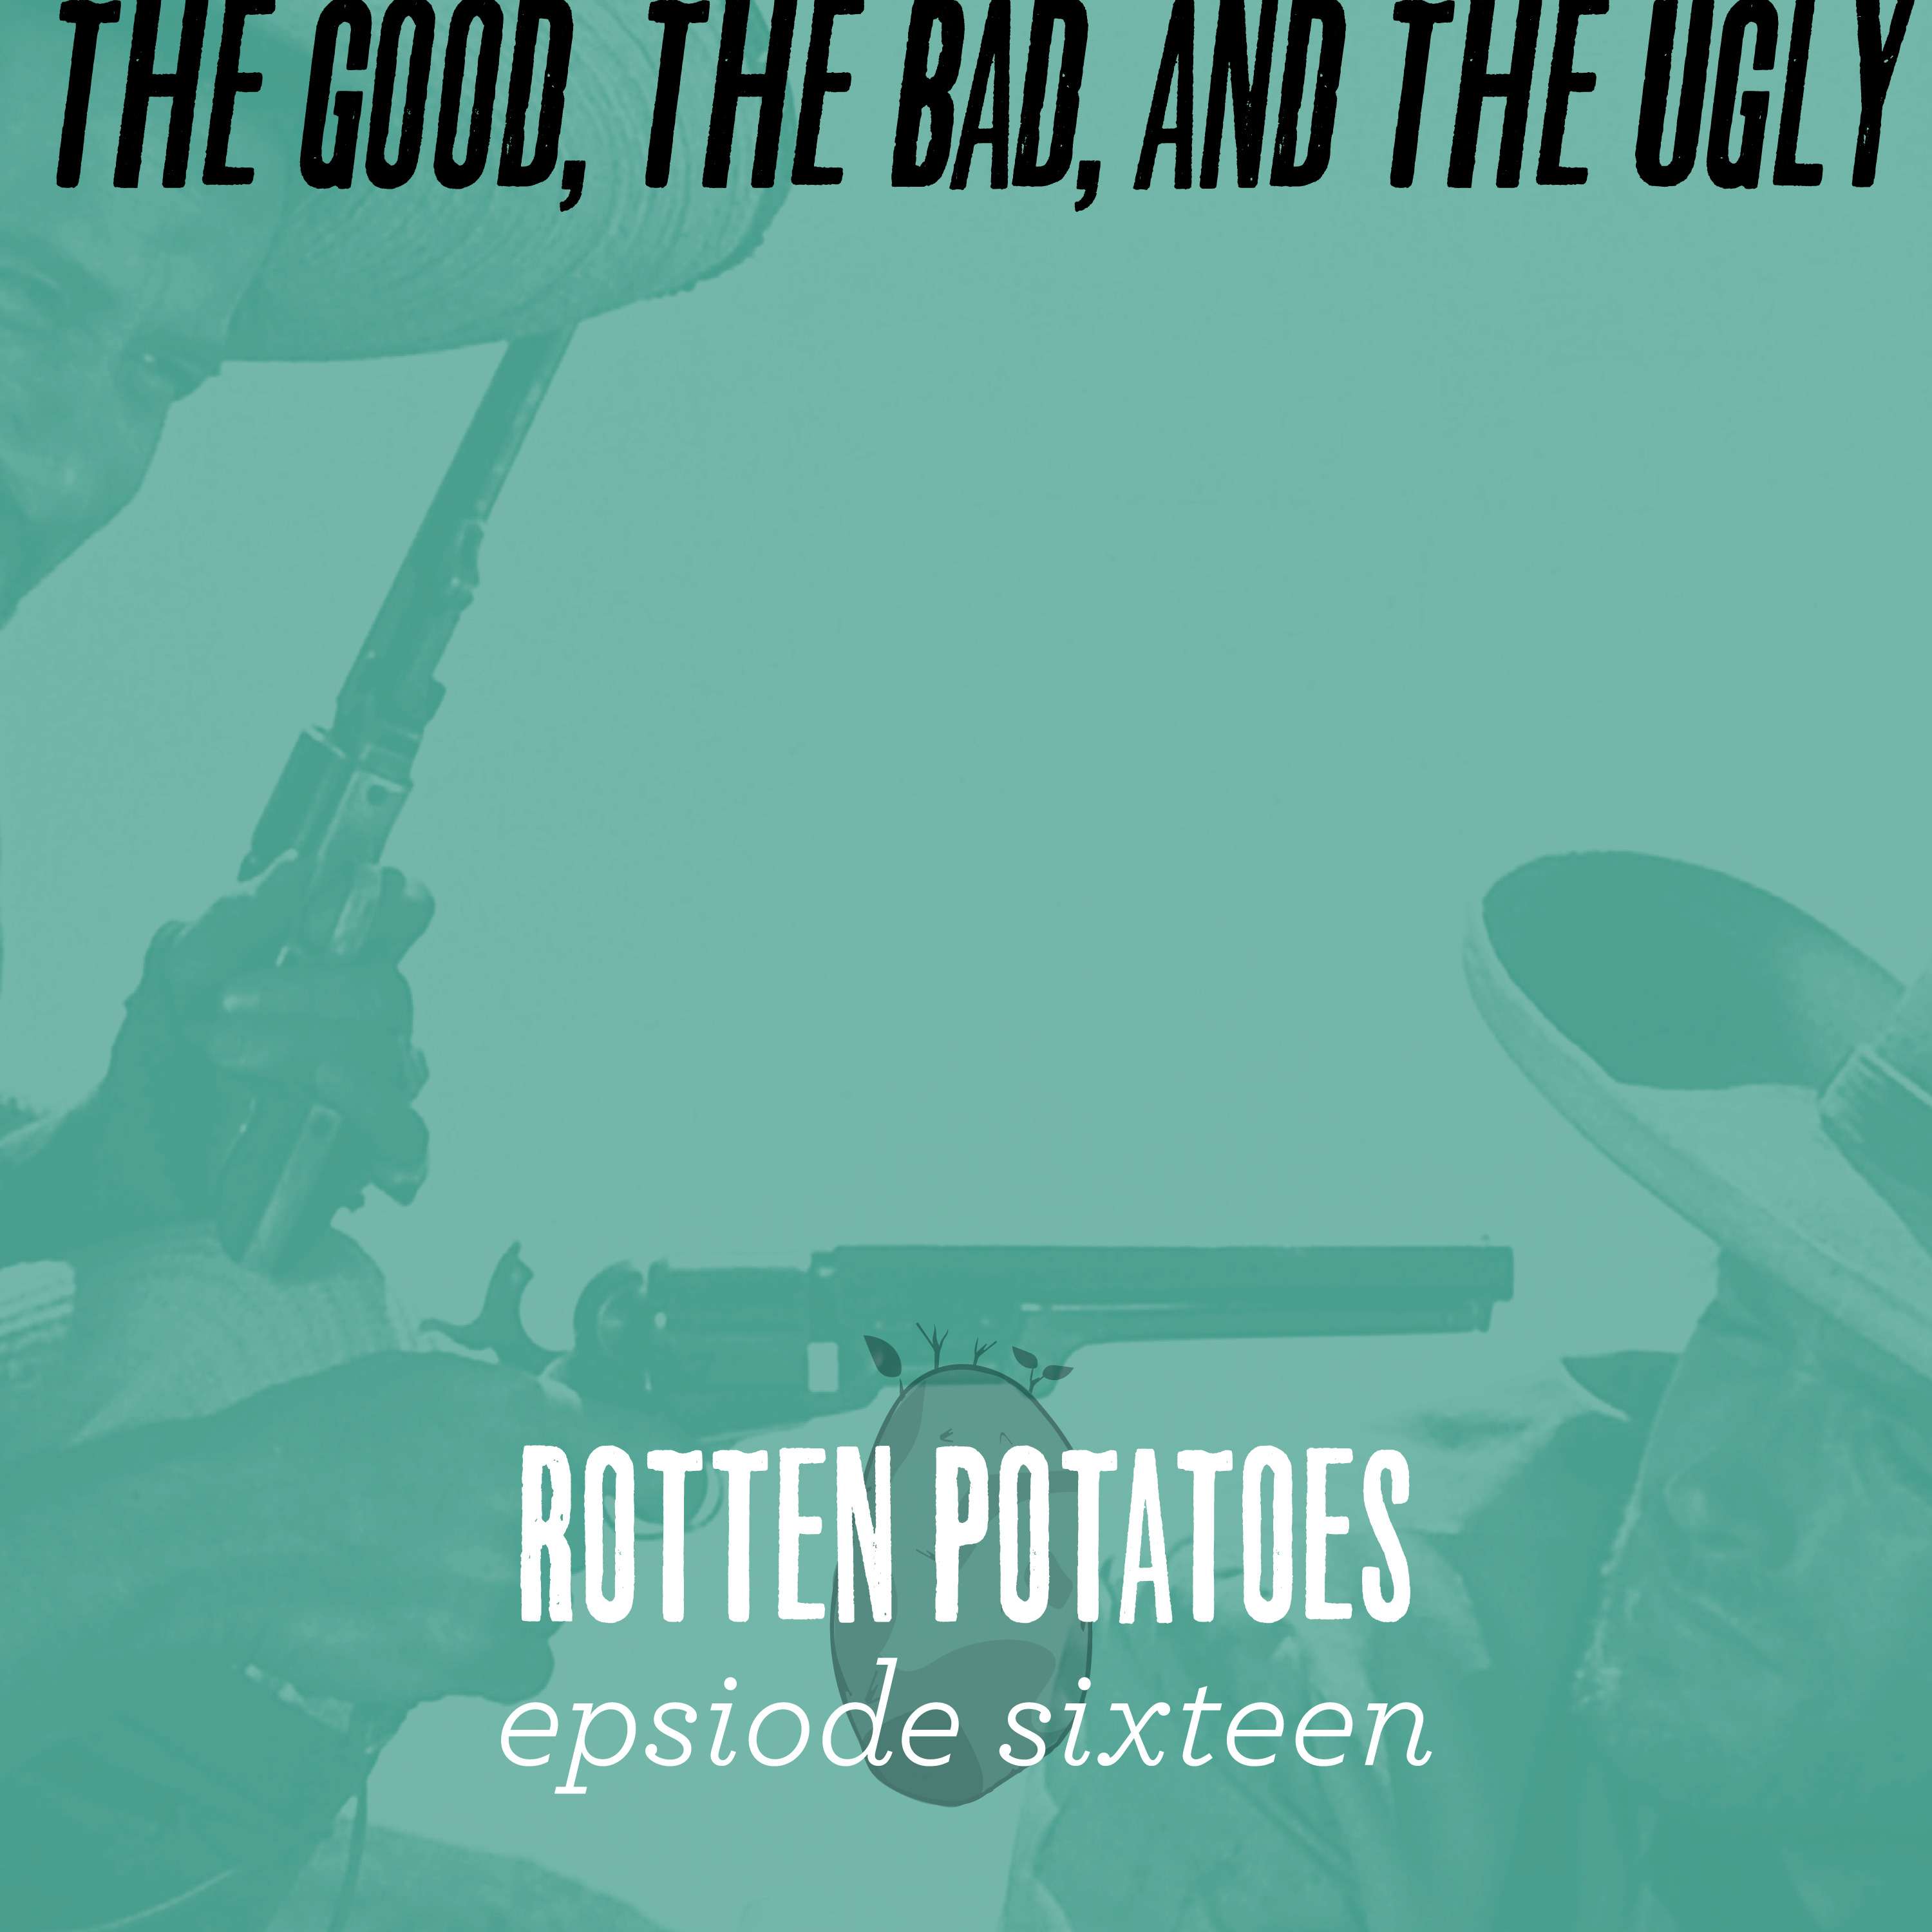 Ep 16: The Good, The Bad, and The Ugly